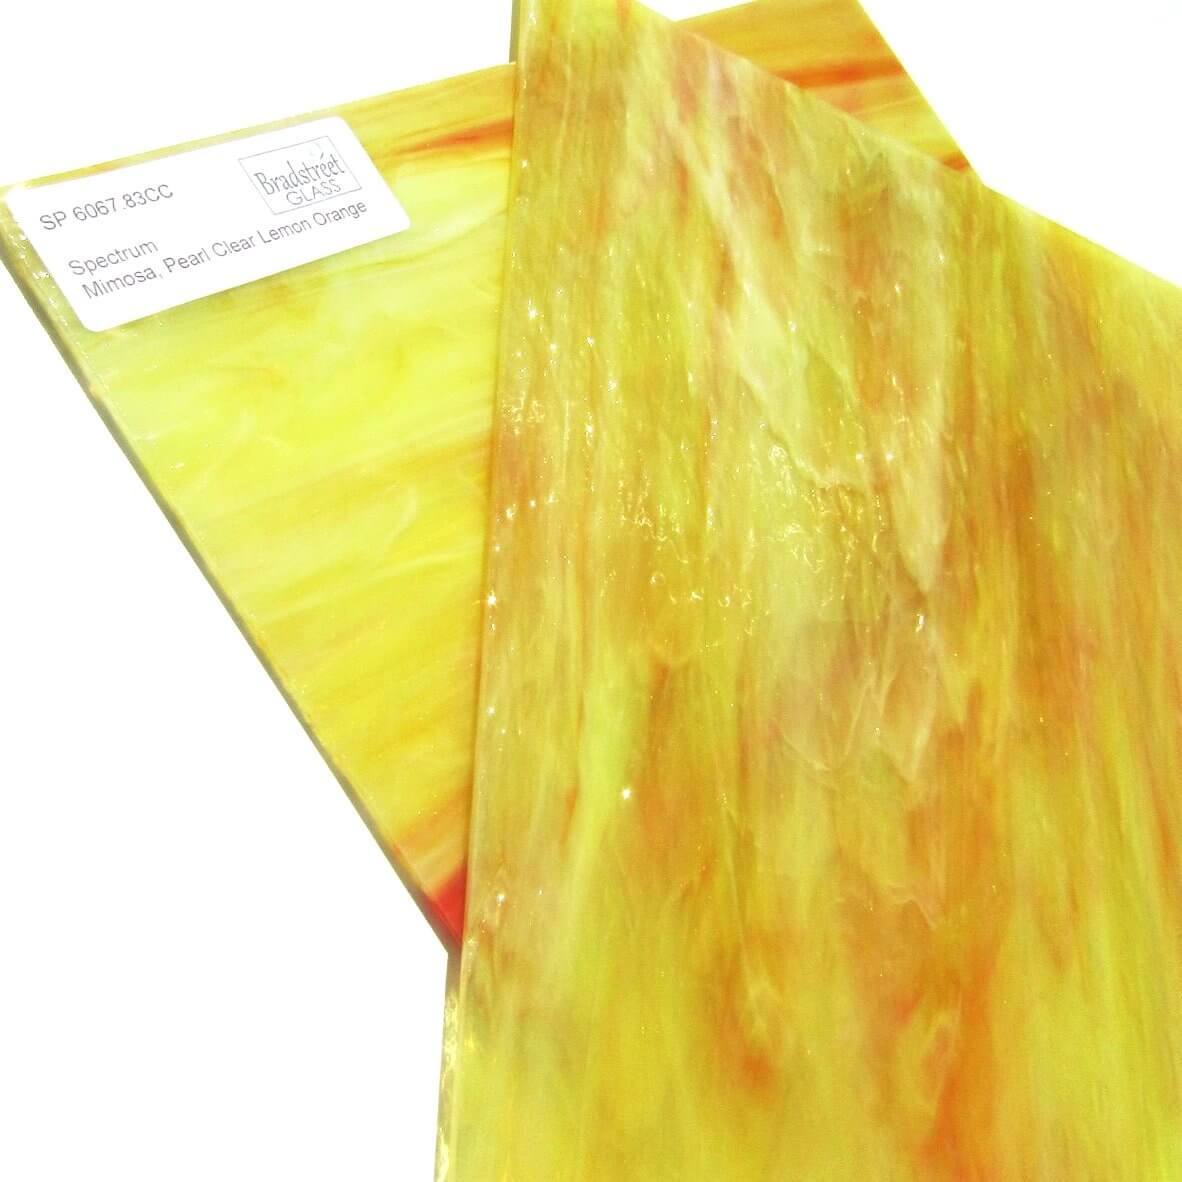 Spectrum 6067.83CC Mimosa Pearl Opal Stained Glass Sheet Opaque Ripple Textured Pearl Clear Lemon Orange